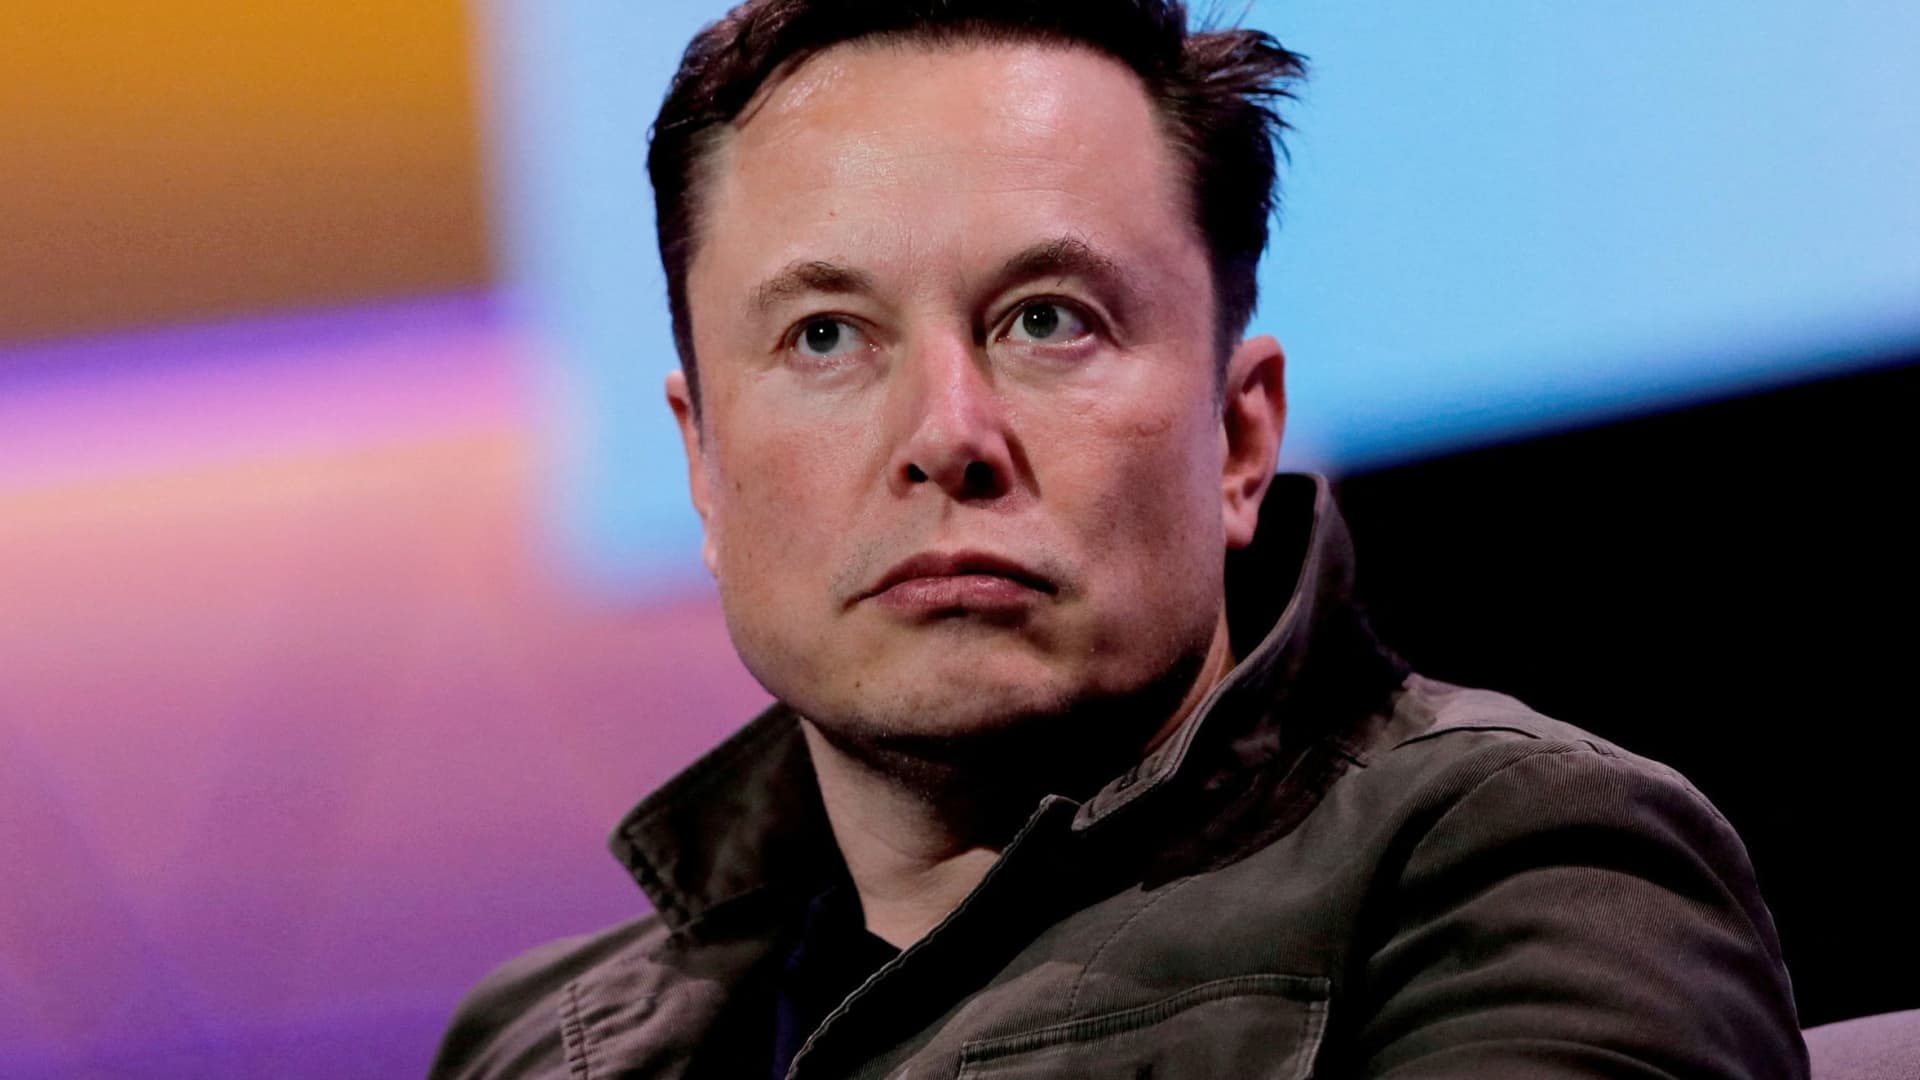 From Elon Musk to Sam Bankman-Fried, a bad week for market geniuses, but was it their fault?